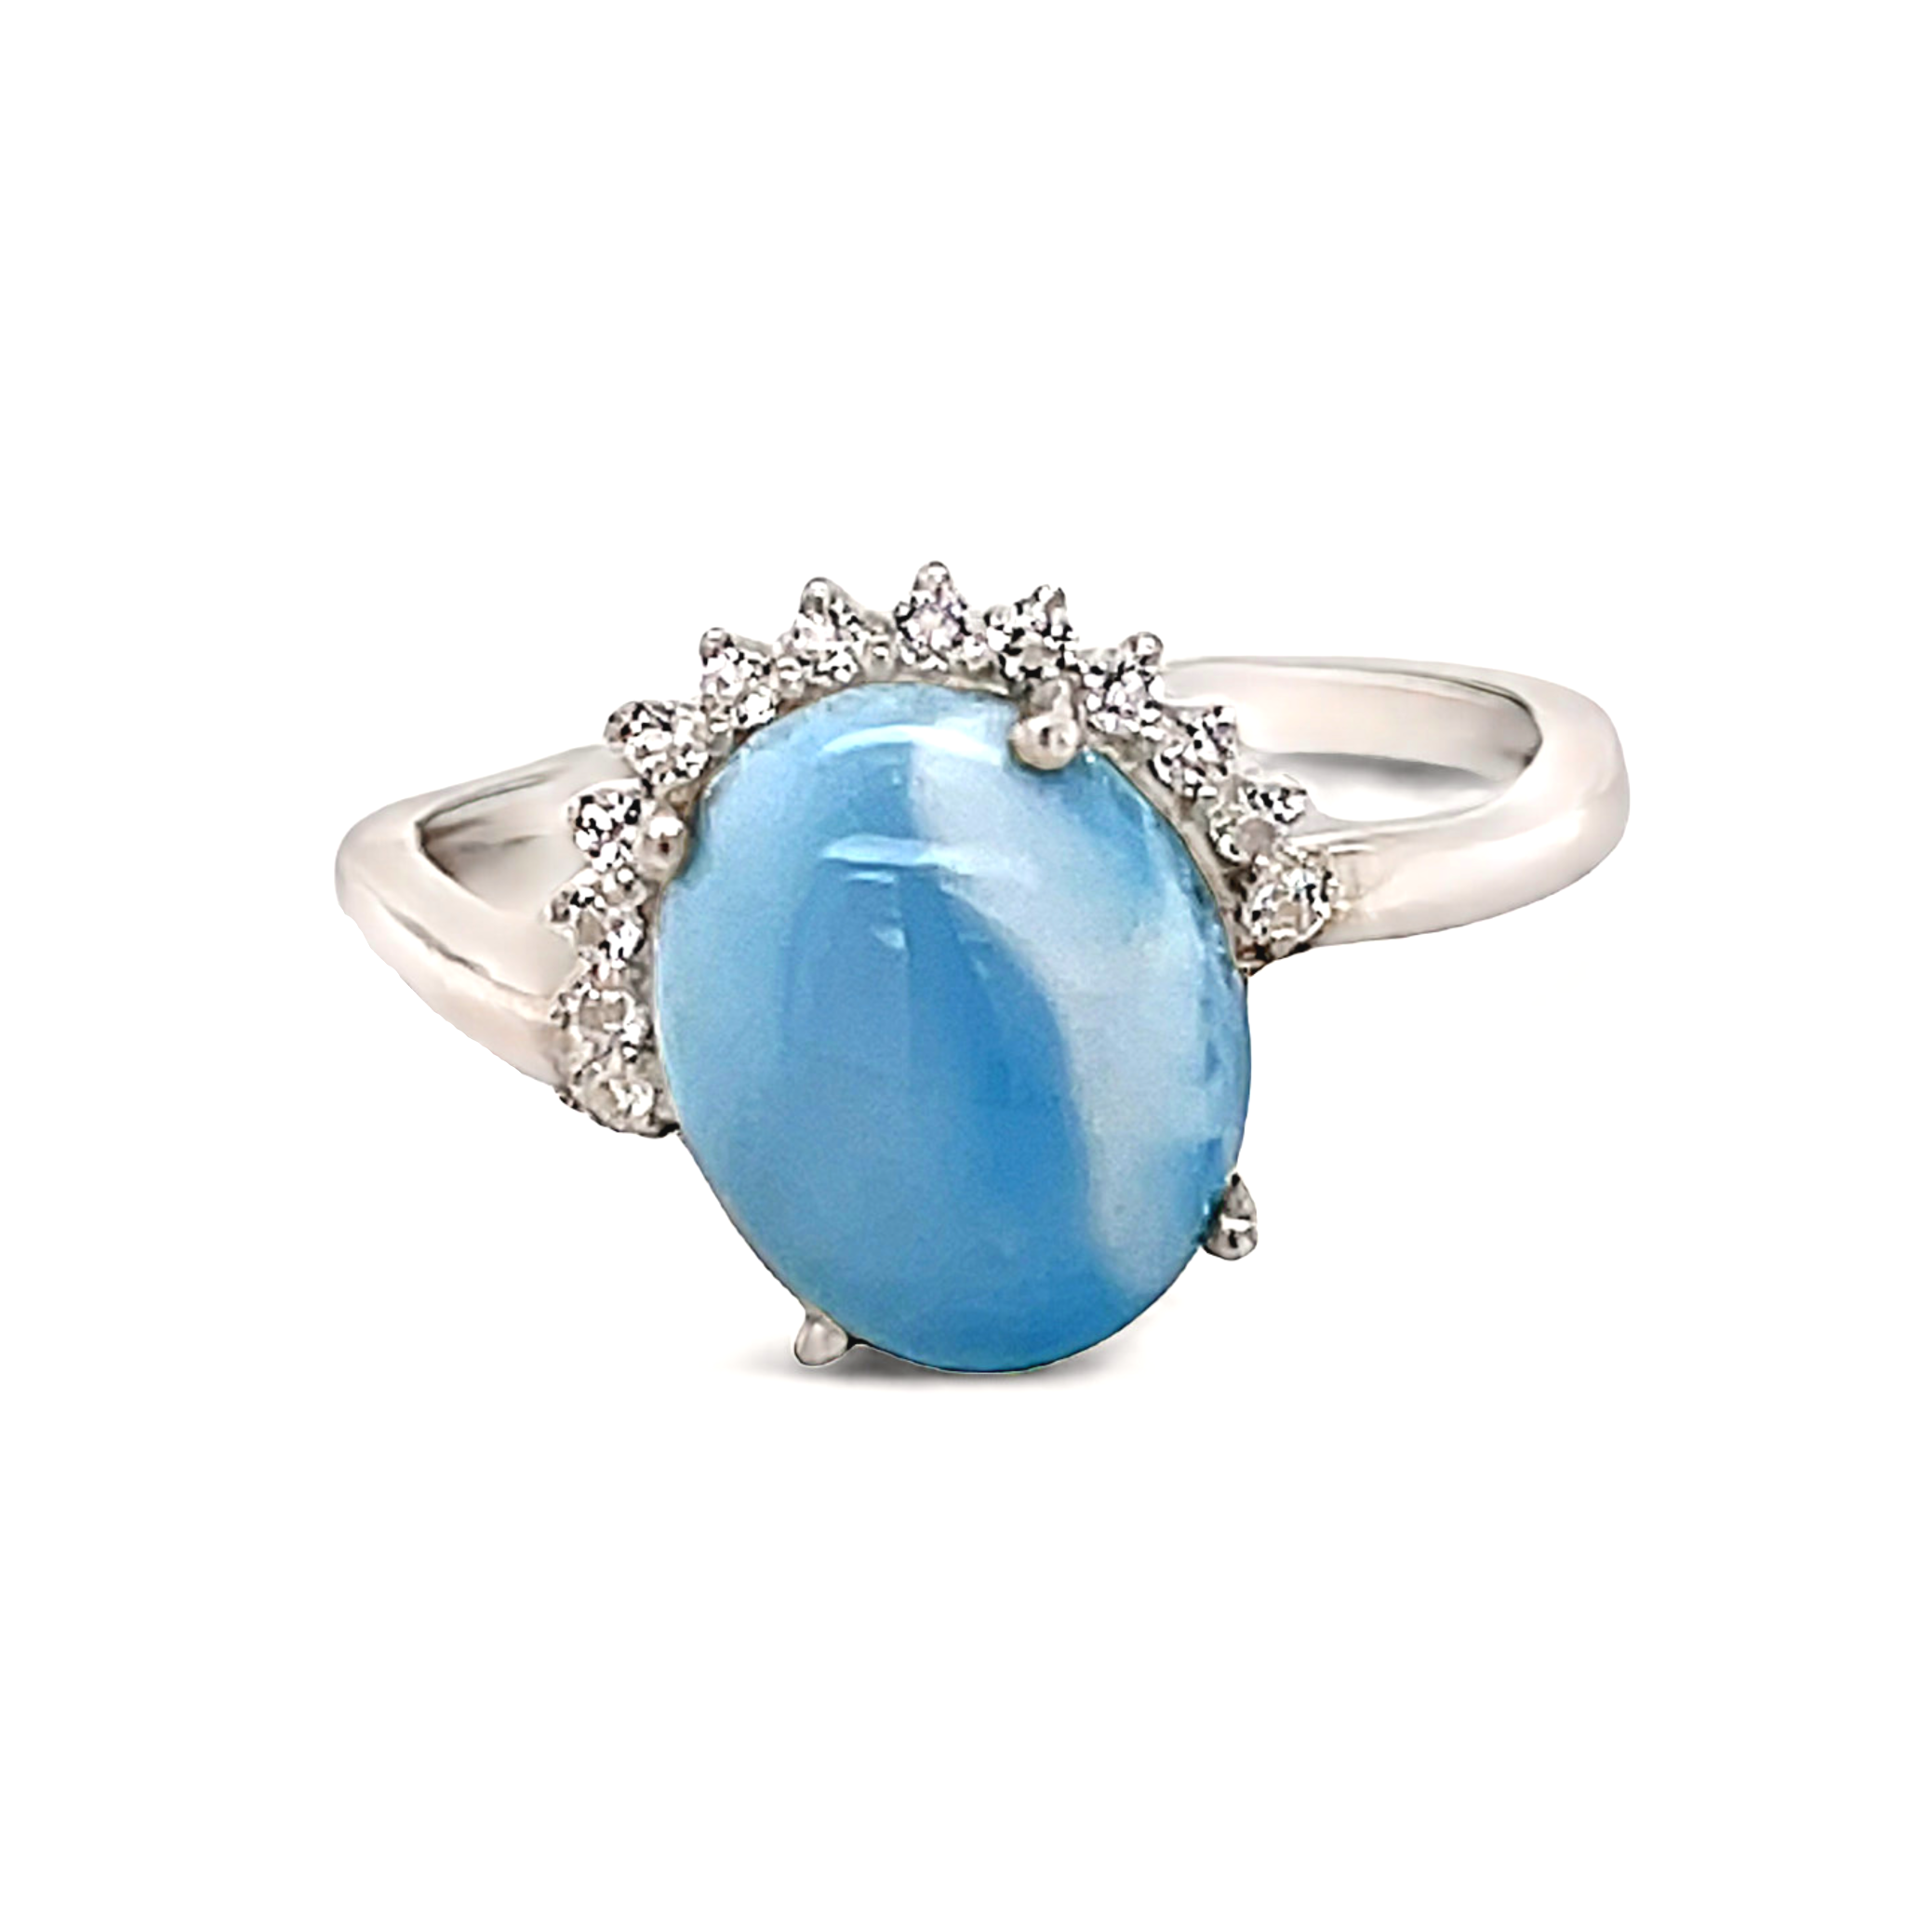 Larimar Ring Size 10 - Prong Set Oval With White Czs Set In Half The Silver Bezel